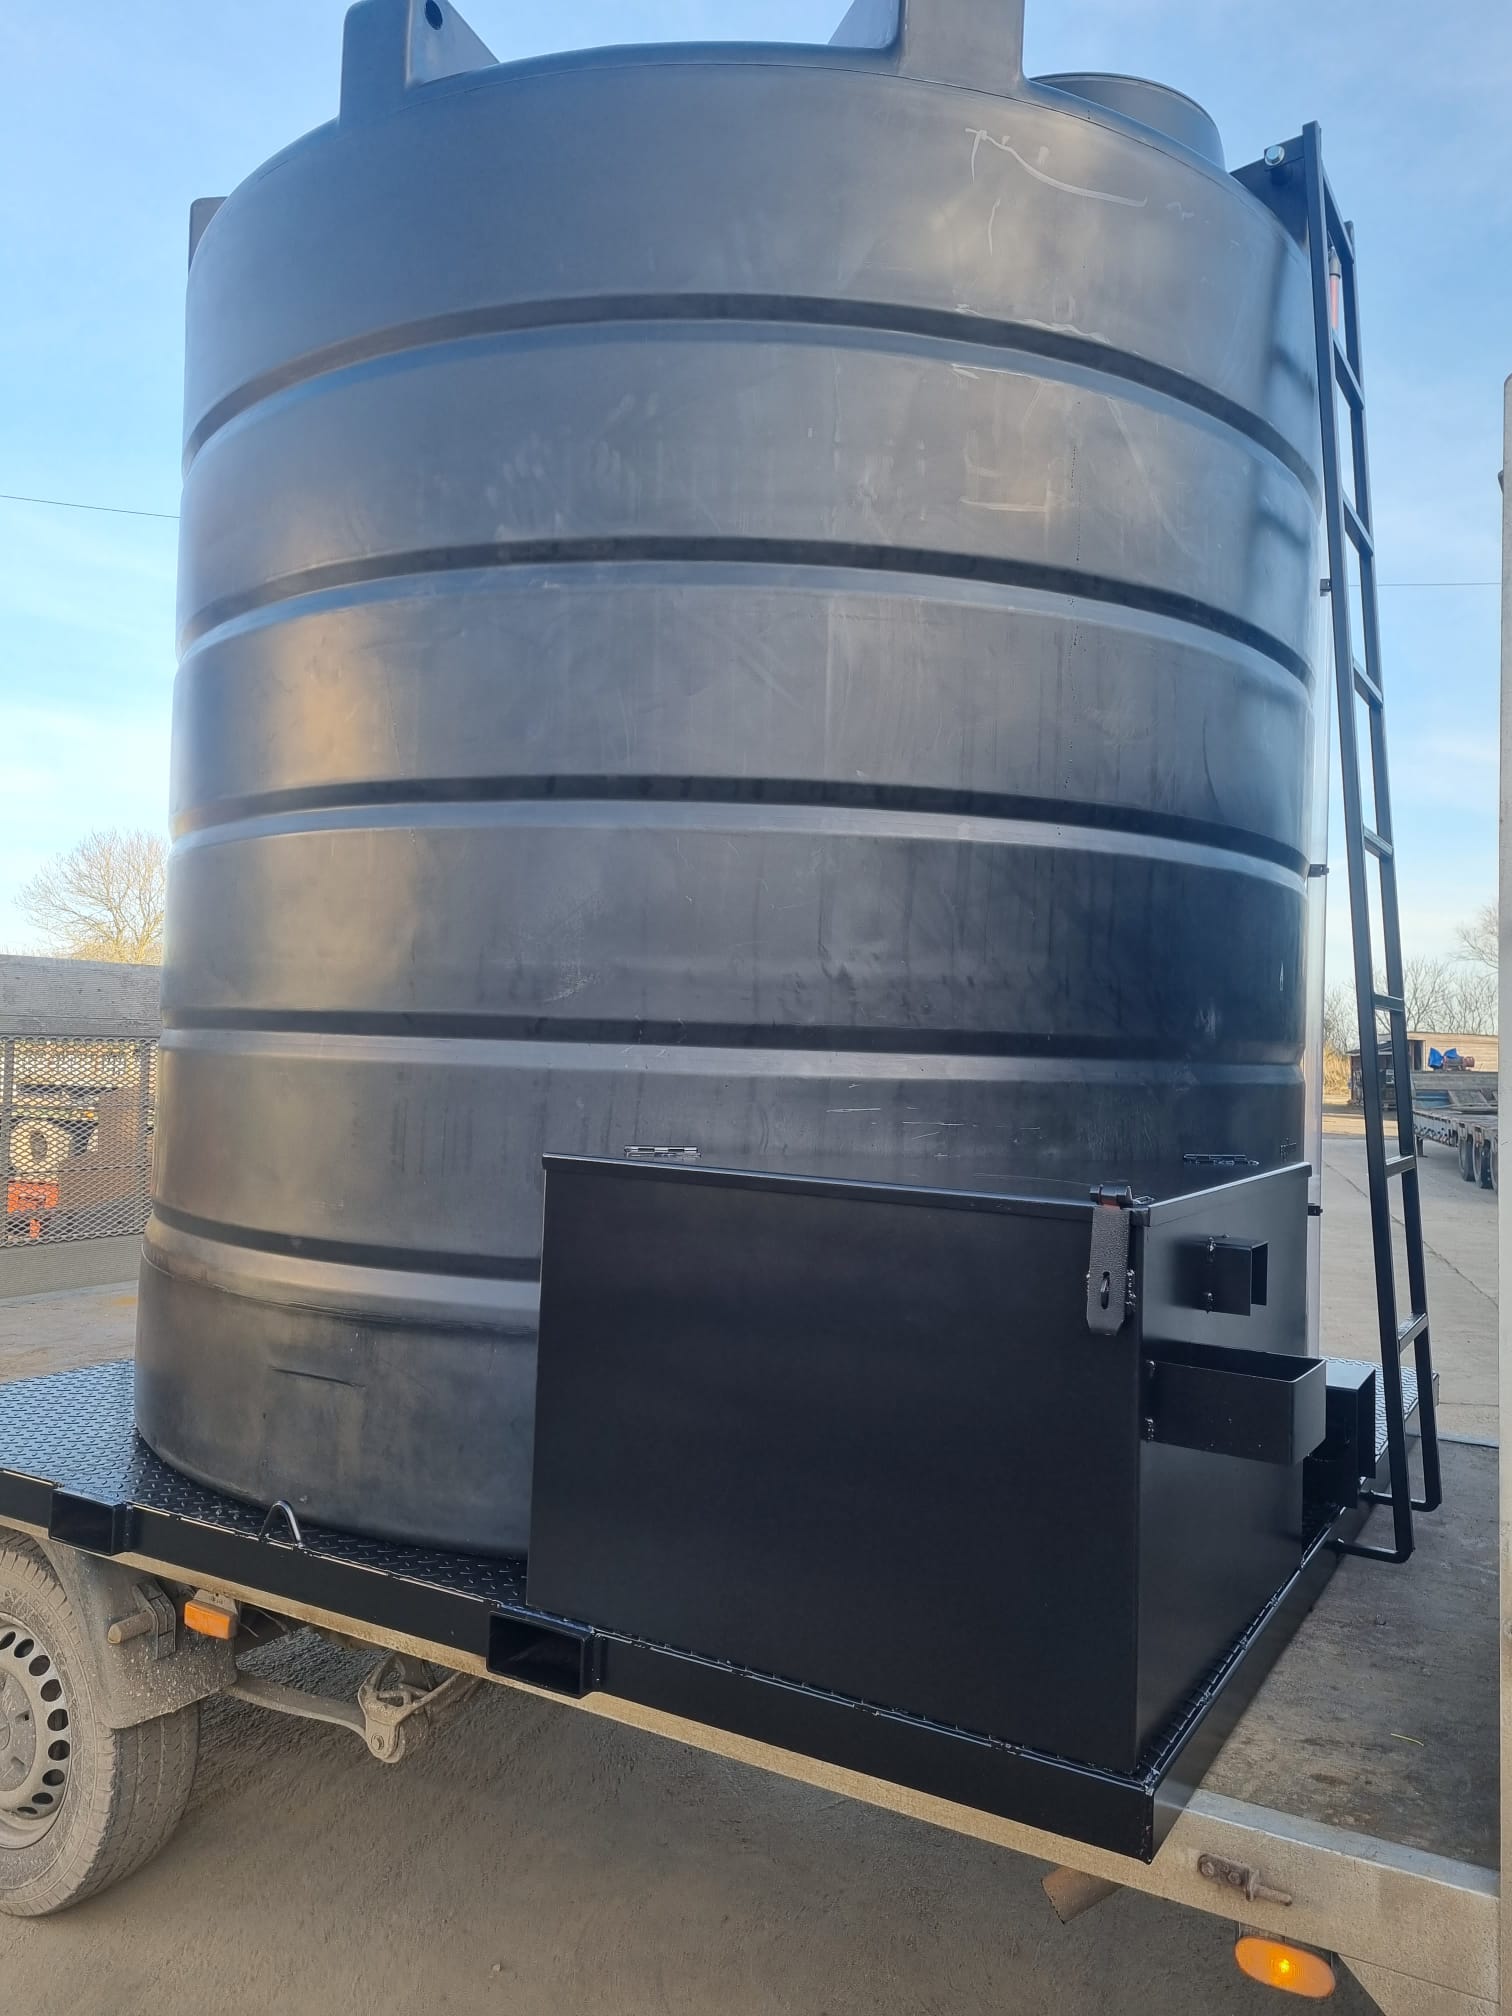 Affordable 10,000ltr Water Tank, With On Demand Pump To Hire In Cambridge